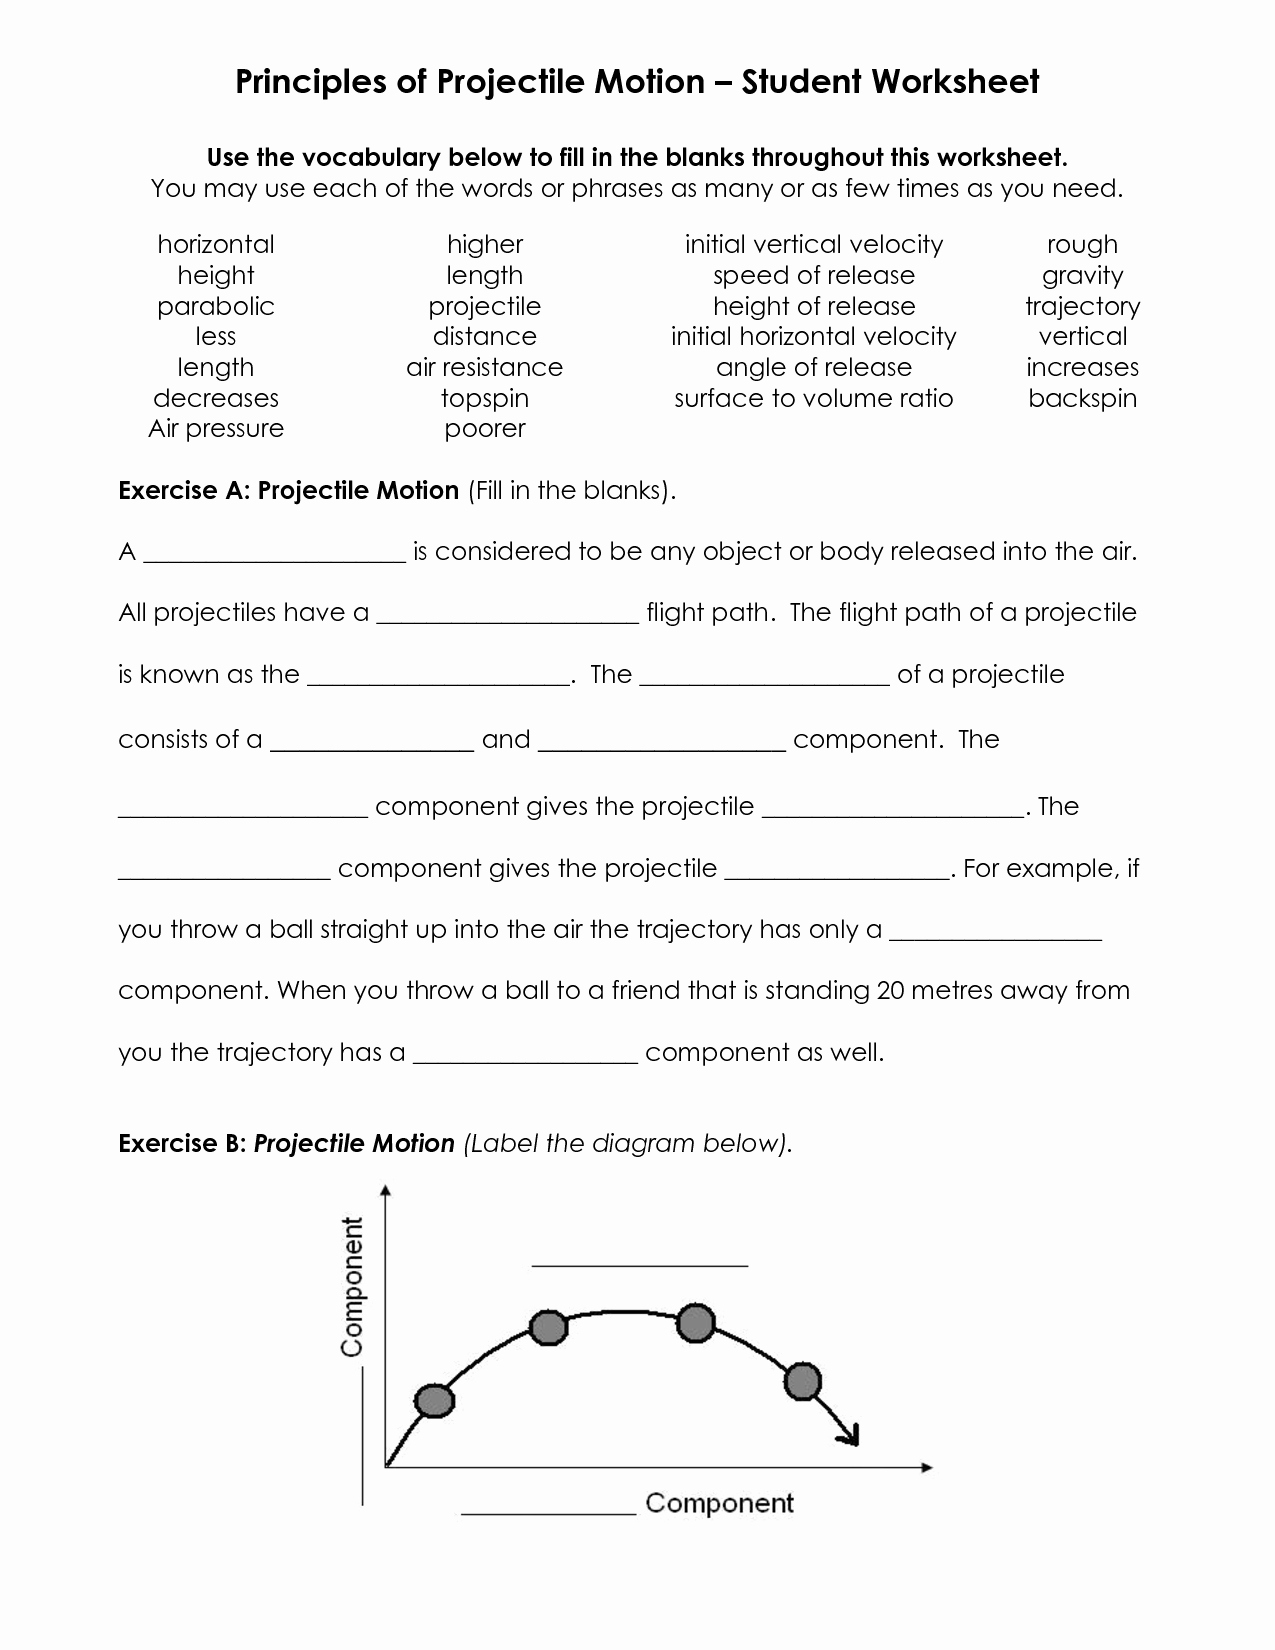 Projectile Motion Worksheet Answers Luxury Worksheet Projectile Problems